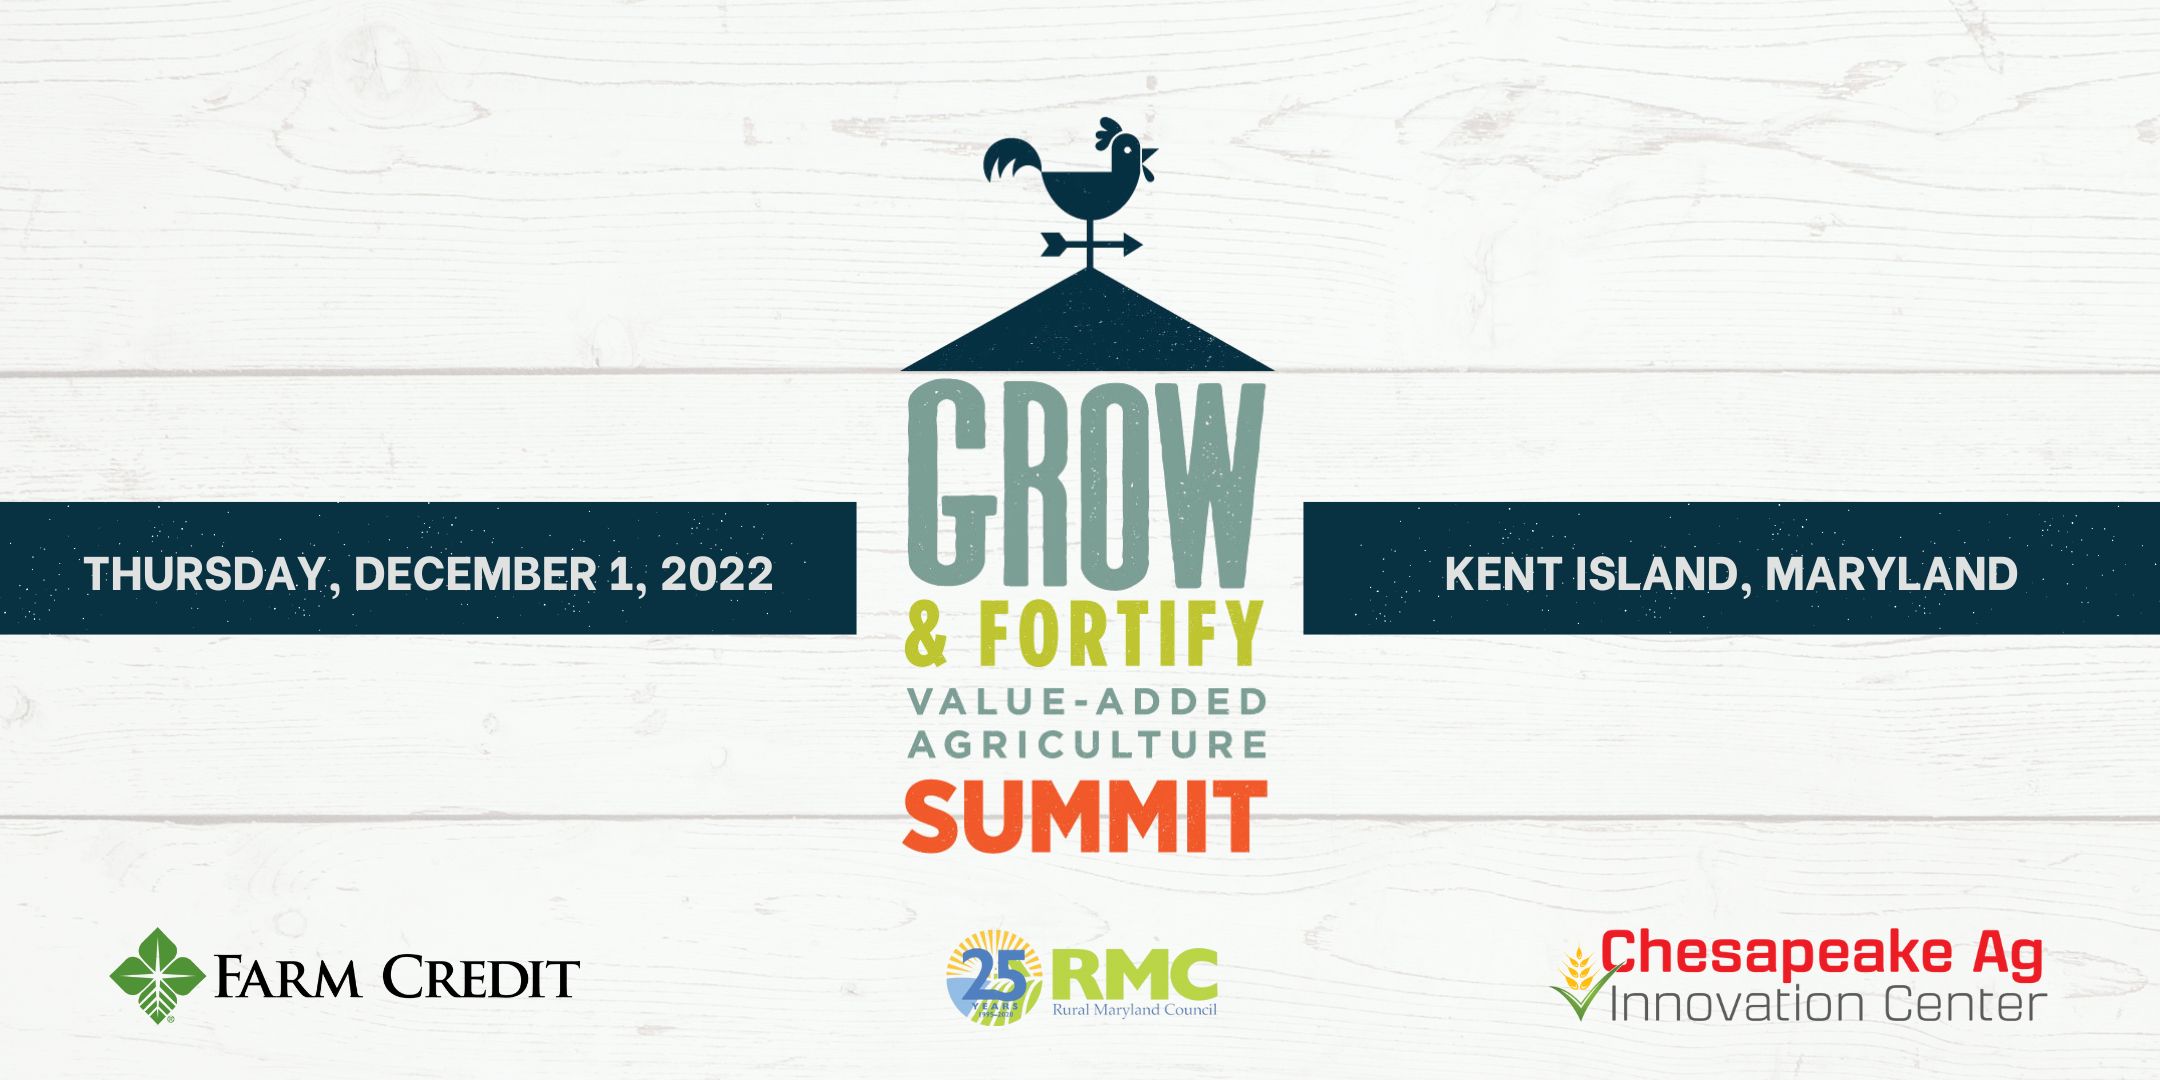 2022 Cultivate & Craft Summit header, includes sponsor logos for Farm Credit, Rural Maryland Council and Chesapeake Ag Innovation Center.